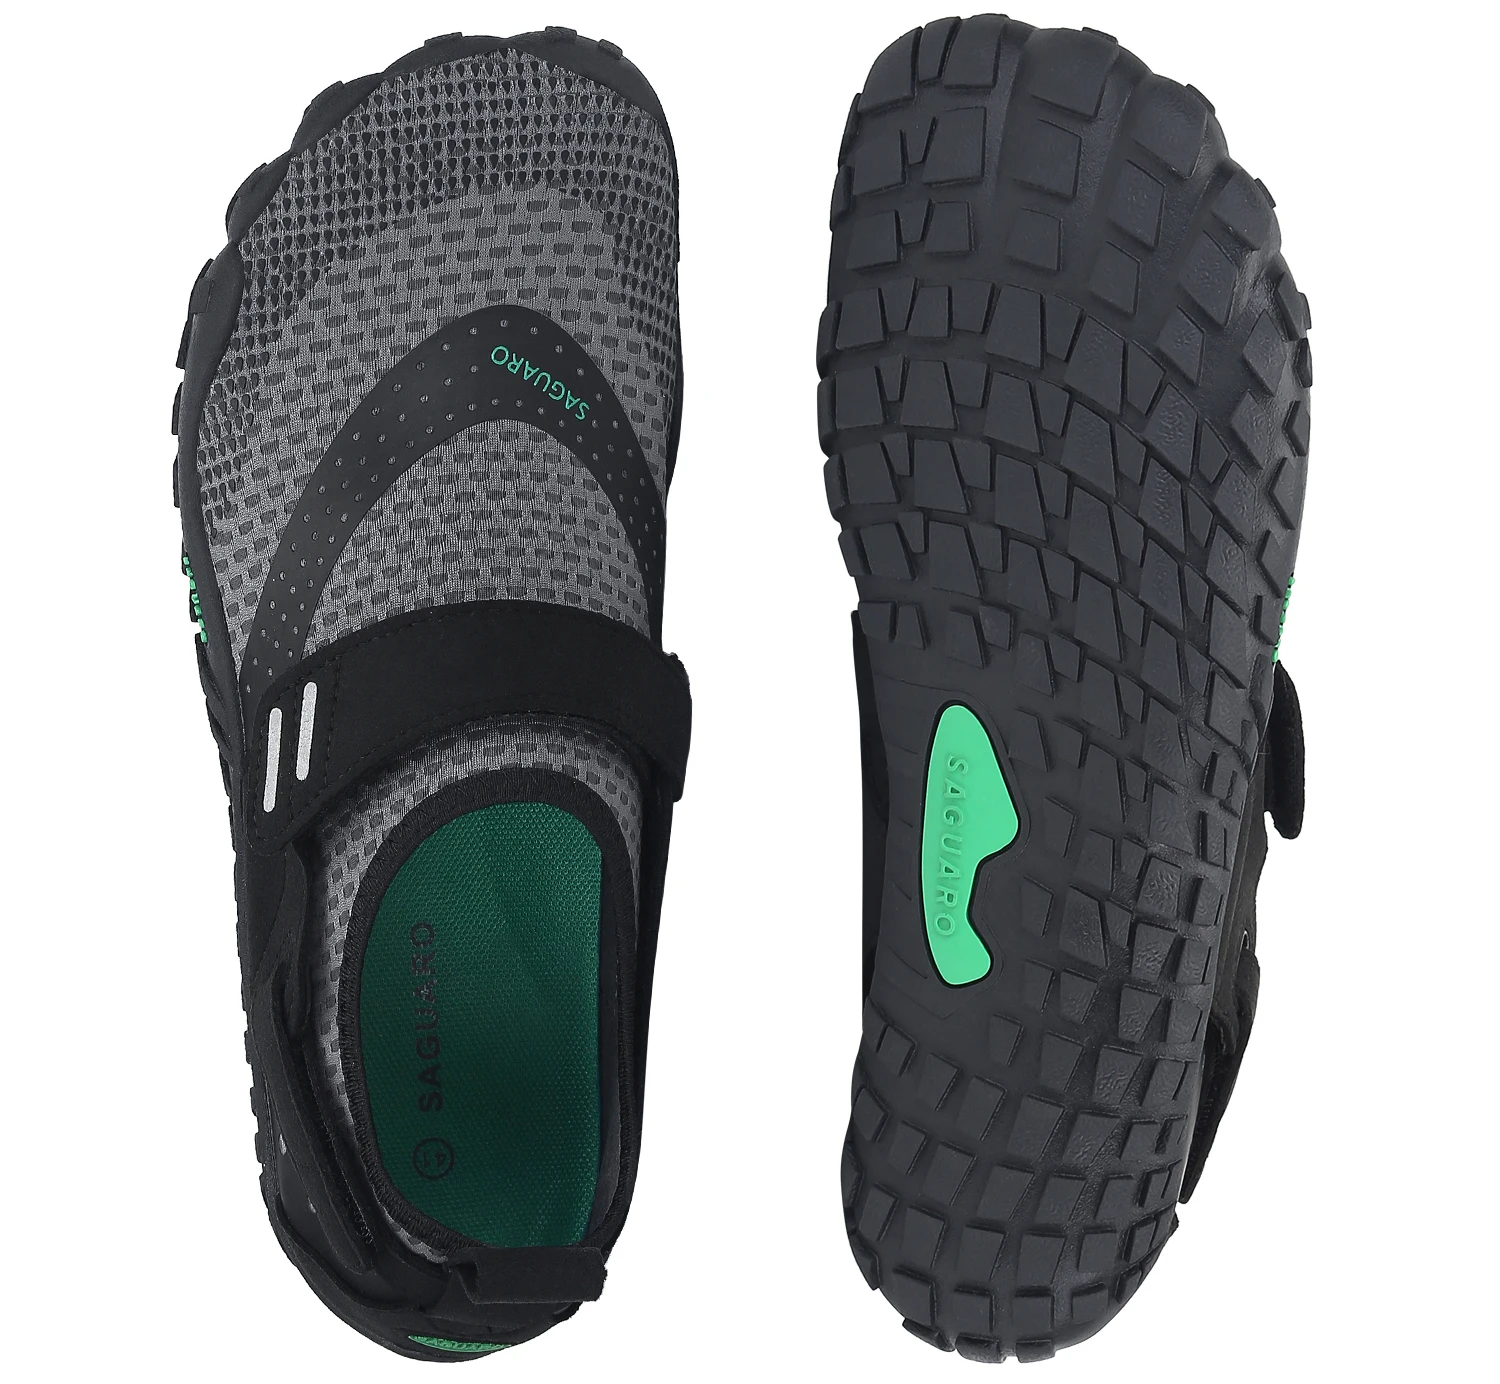 

Fujian Professional Manufacturer Factory Directly Provide Wholesale Price Unisex Barefoot Water Shoes